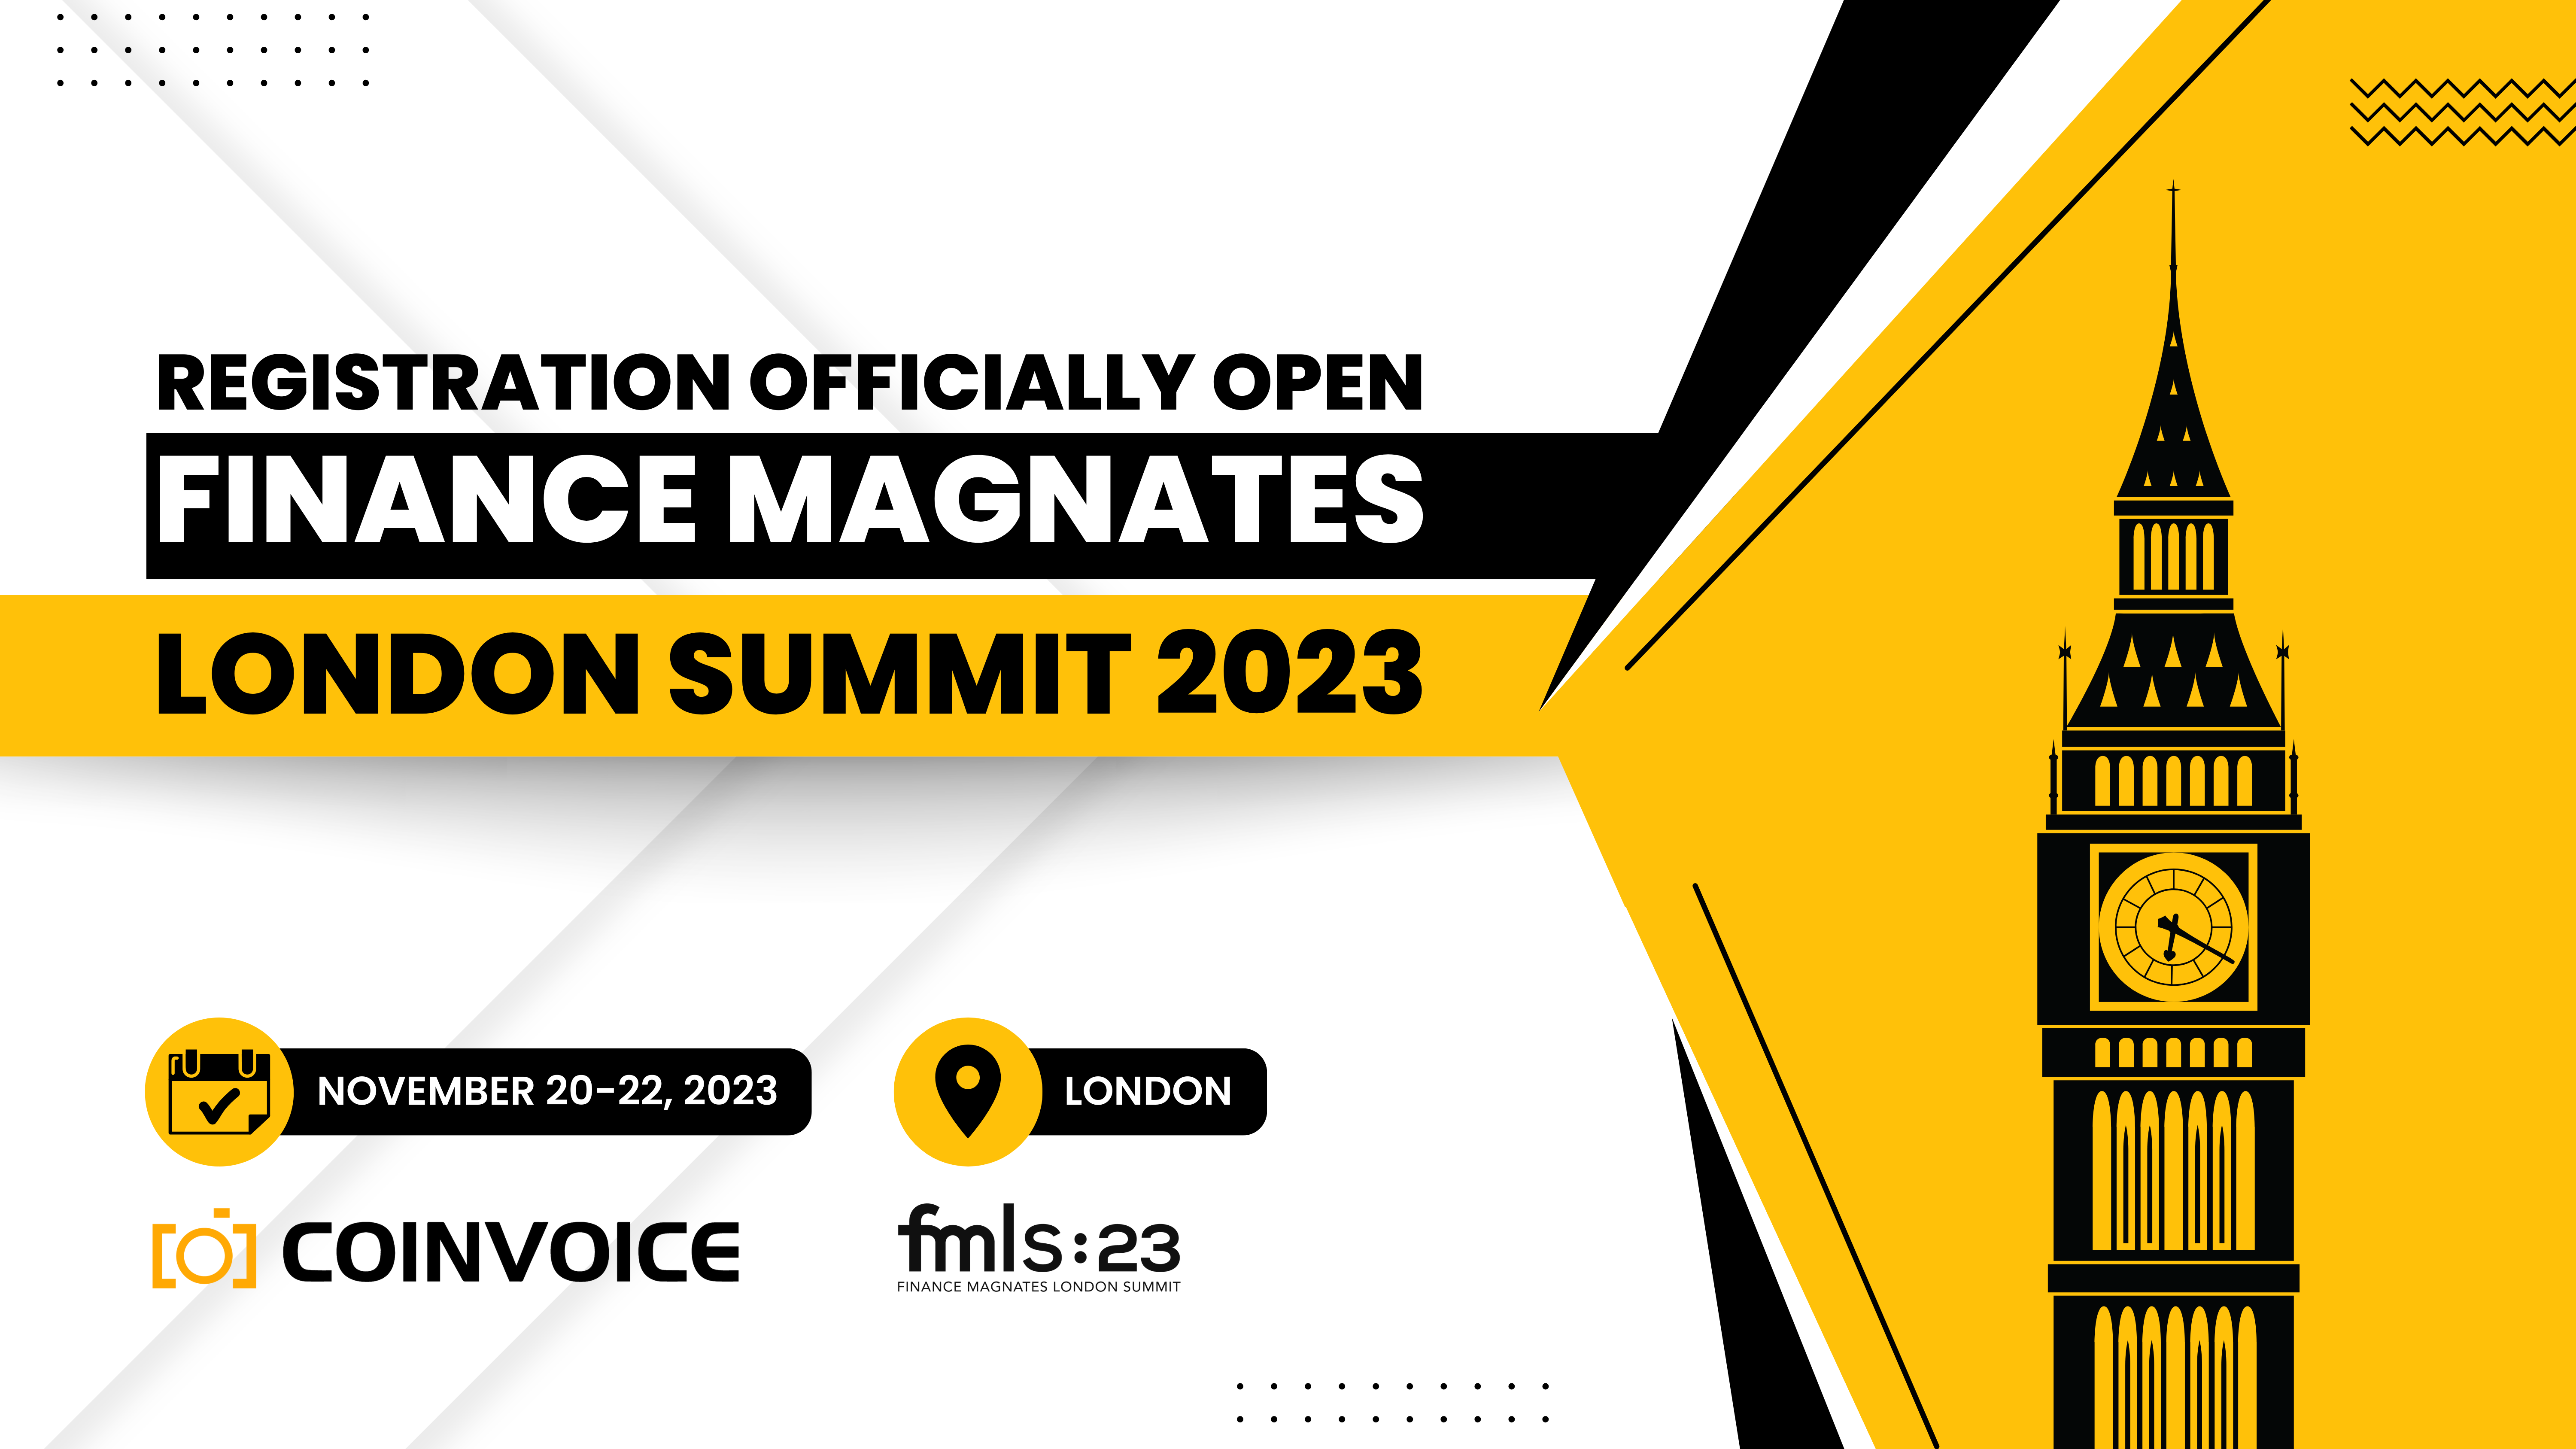 Registration for the Finance Magnates London Summit 2023 is Officially Open